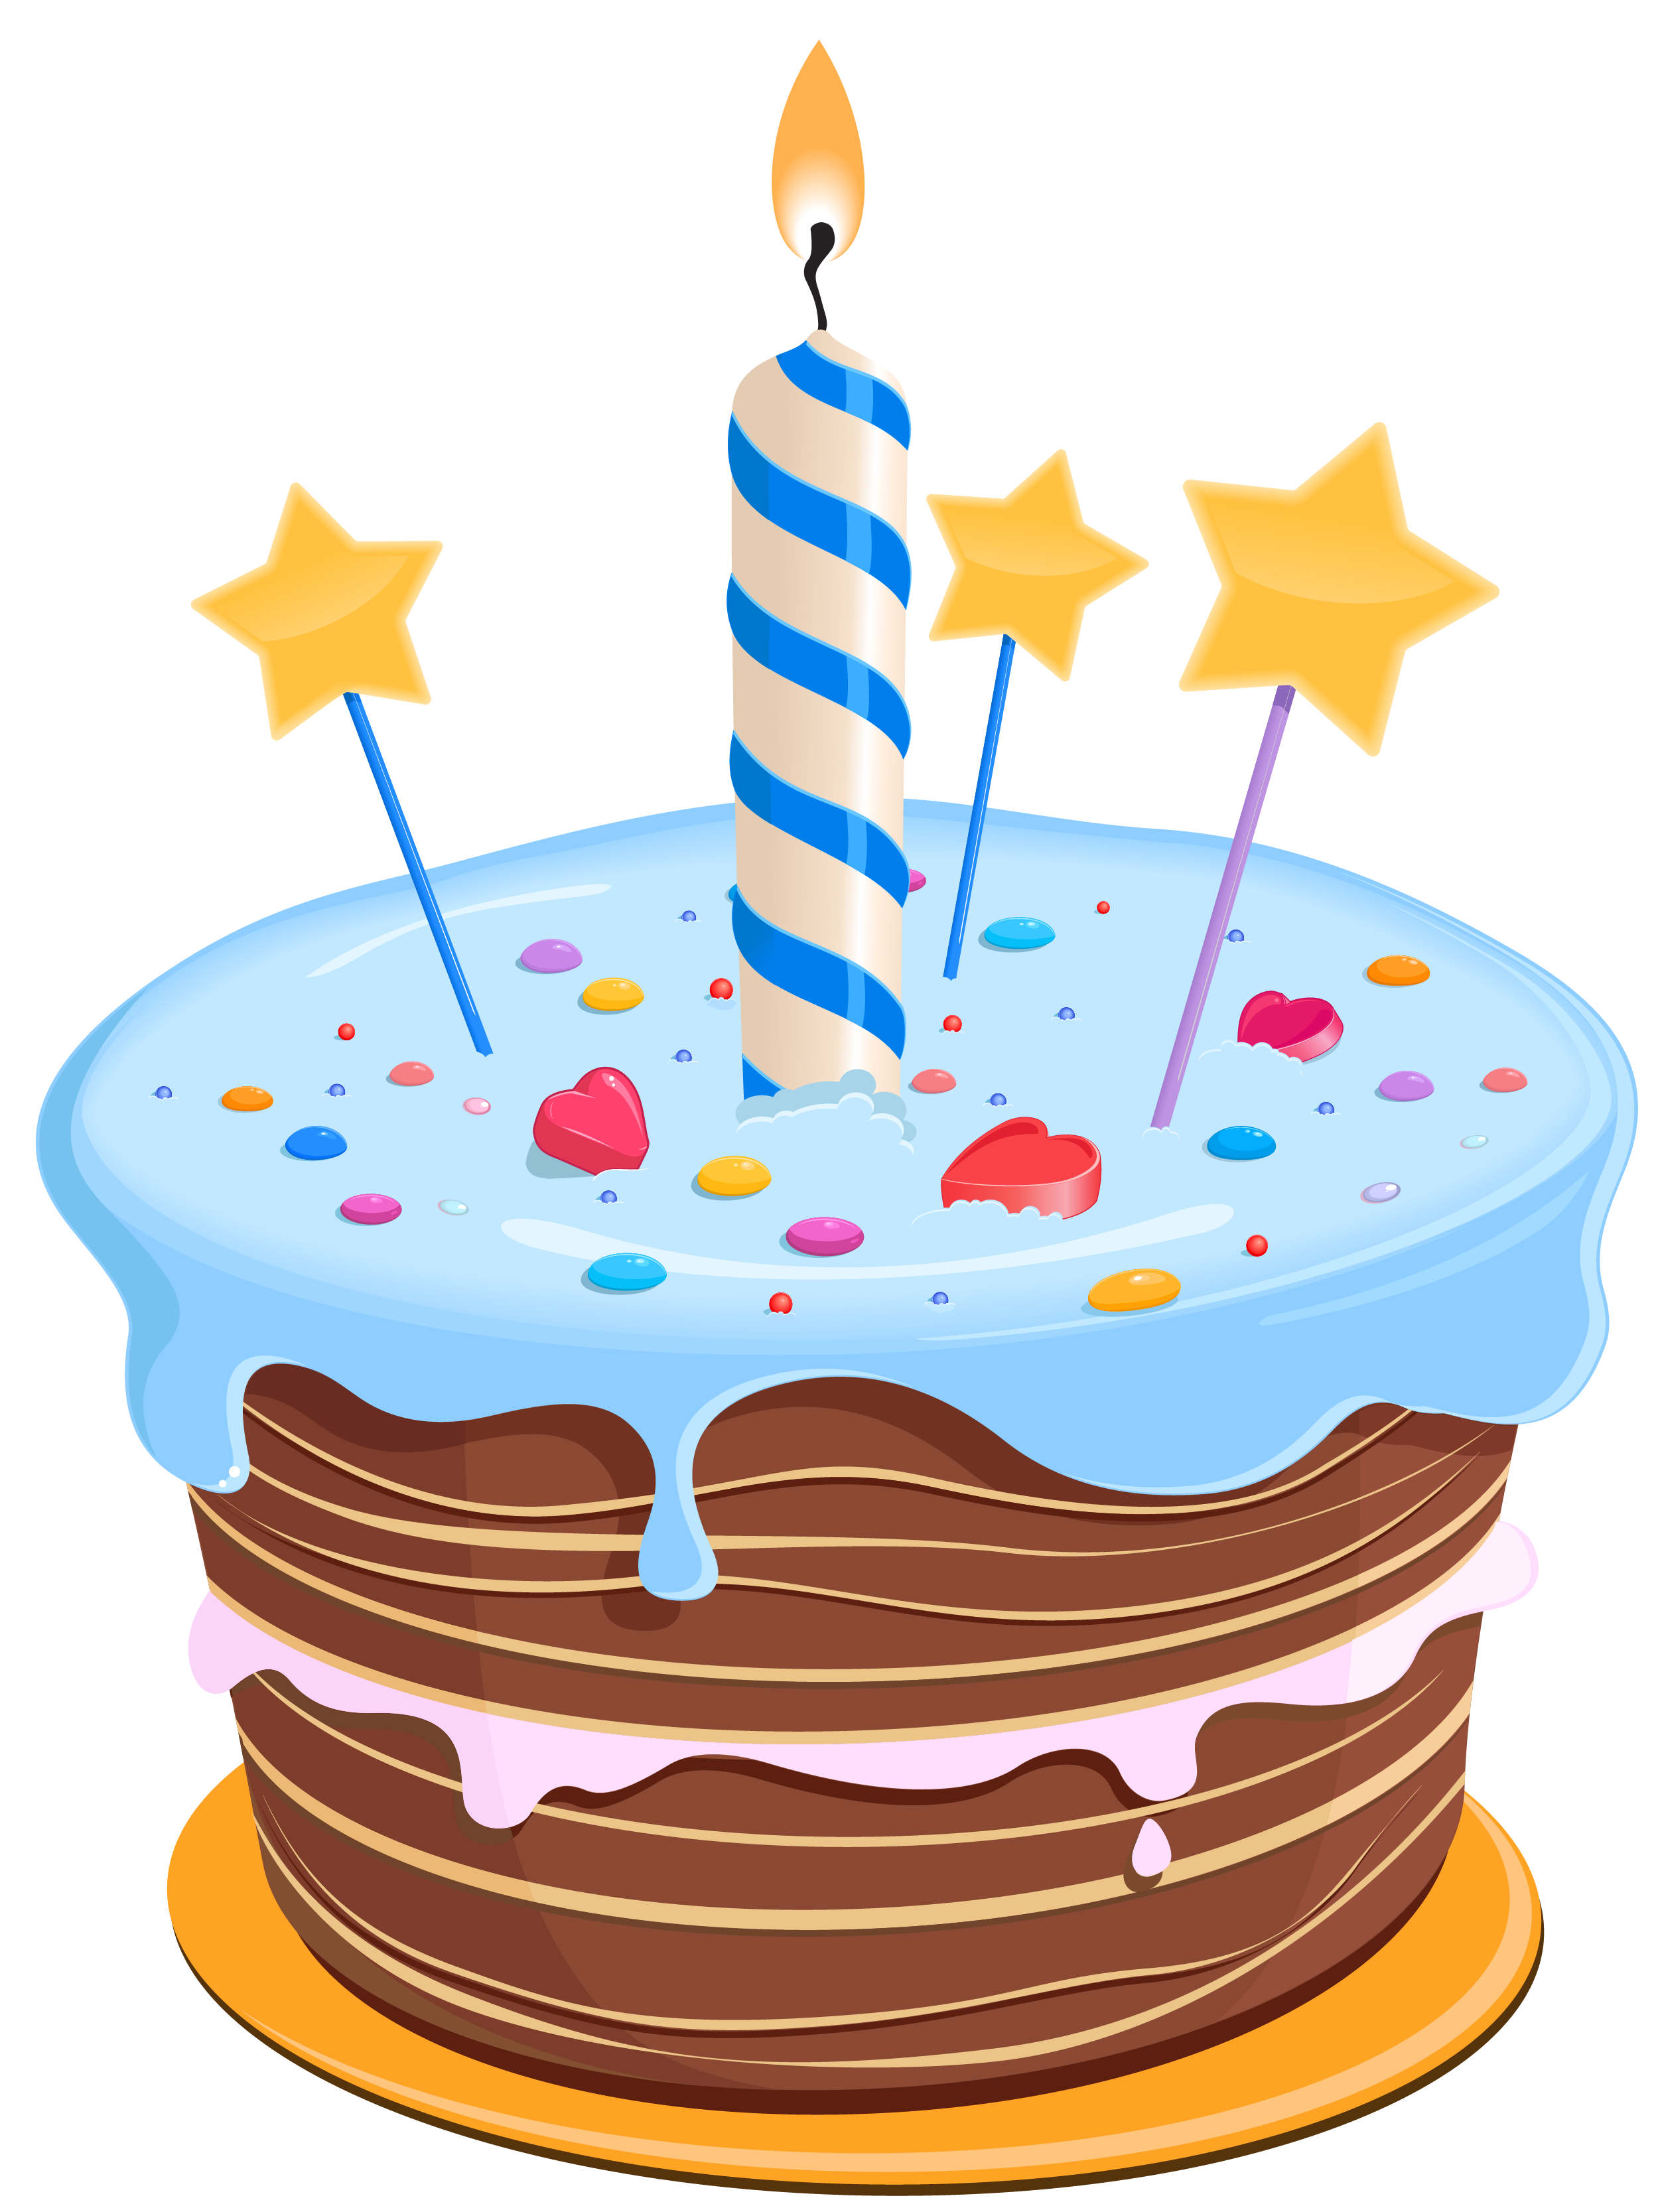 Cake PNG image transparent image download, size: 6352x6185px